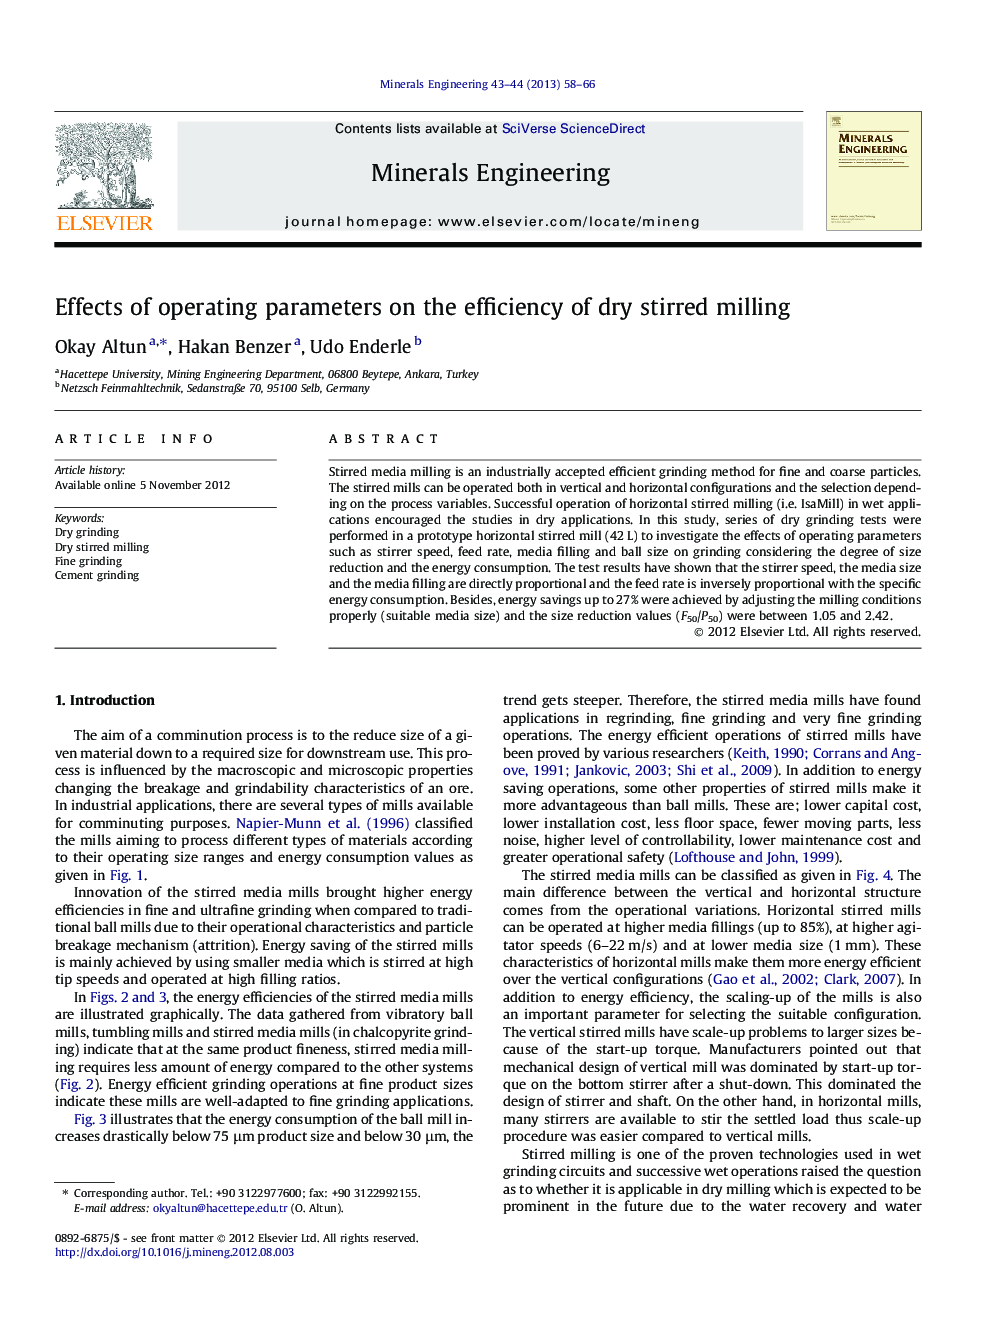 Effects of operating parameters on the efficiency of dry stirred milling